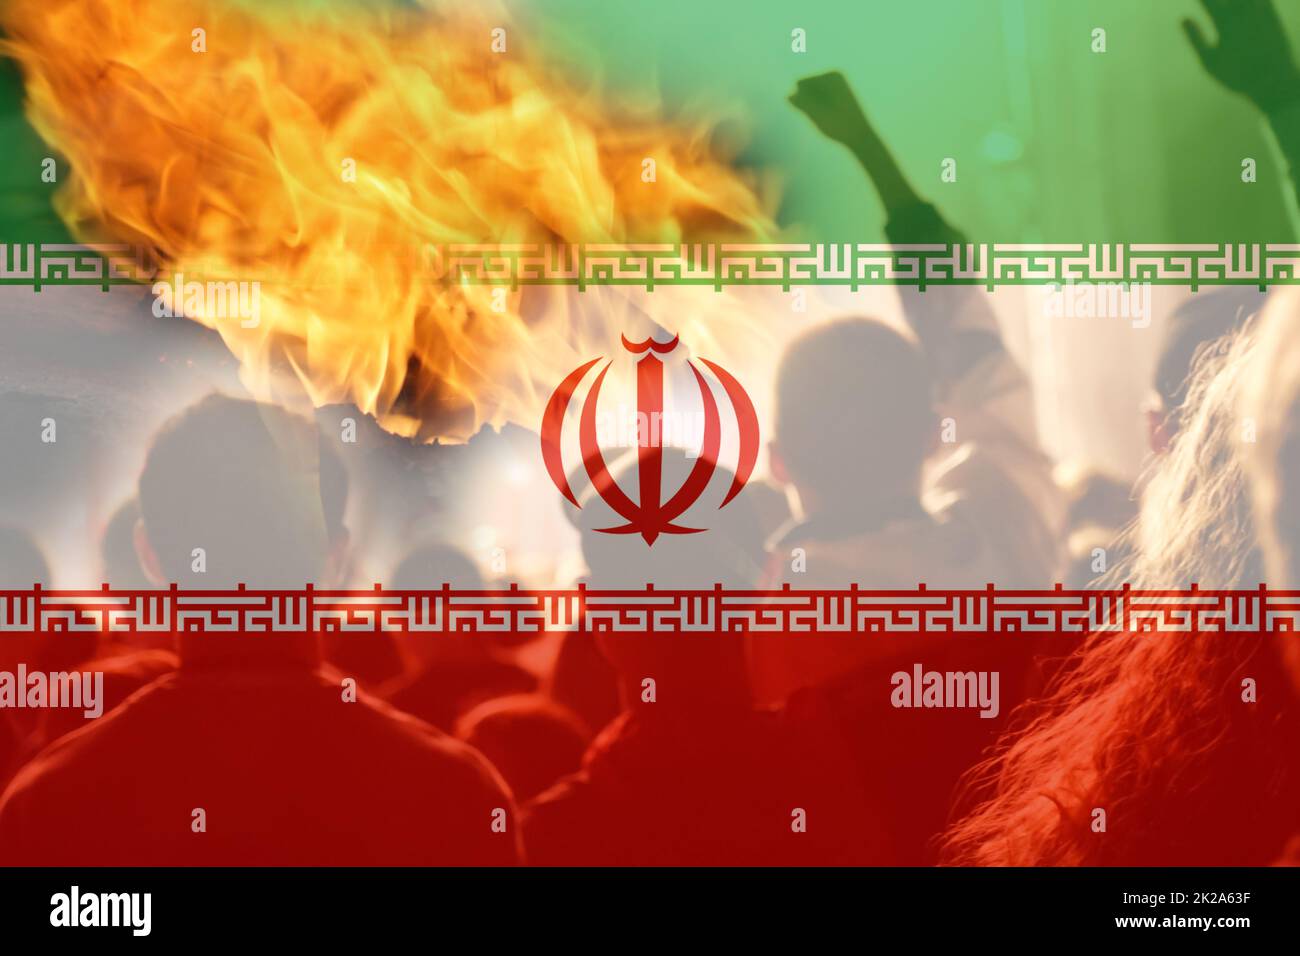 Defocus protest in Iran. Conflict war over border. Fire, flame. Country flag. Out of focus. Stock Photo